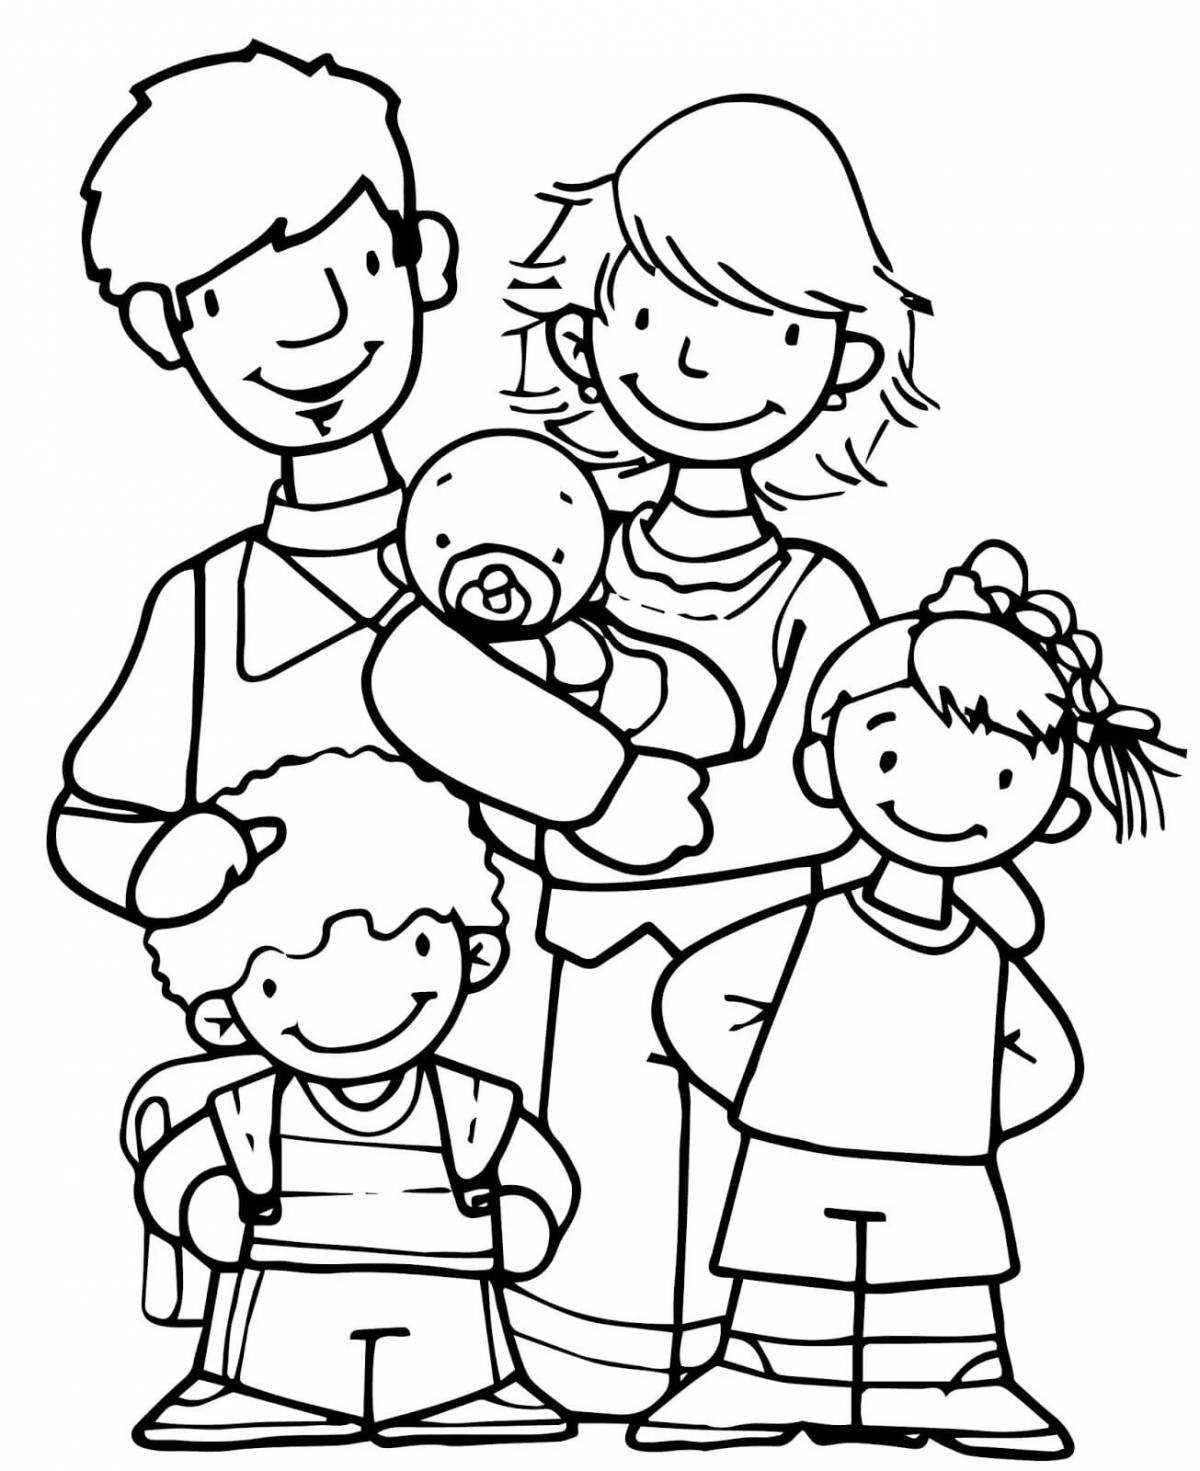 Colorful family coloring book for 4-5 year olds